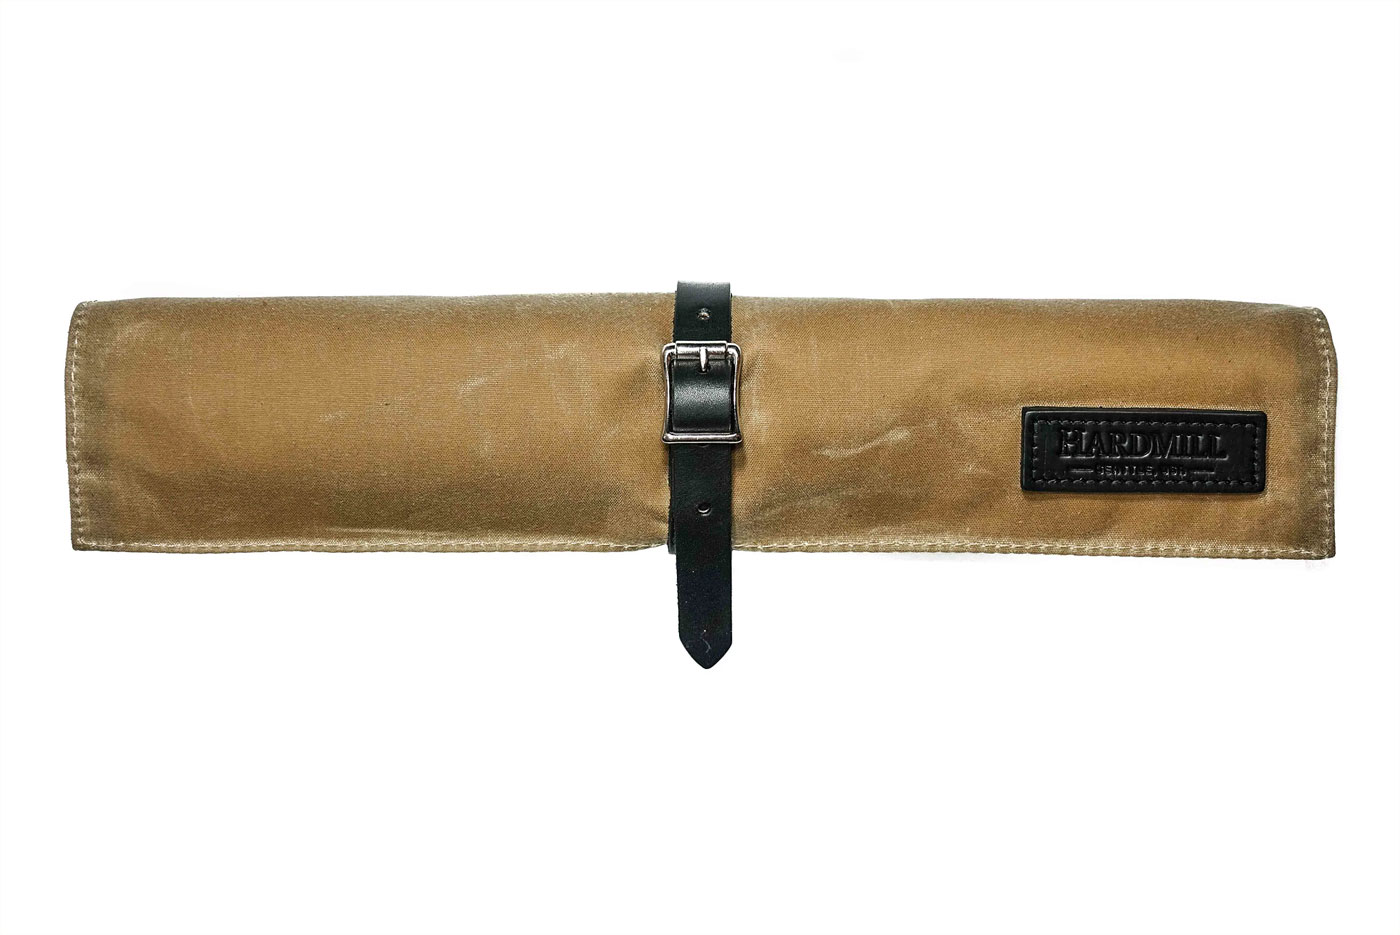 4 Pocket Waxed Canvas Compact Knife Roll with Leather Trim - Field Tan (CK-WC-FT)